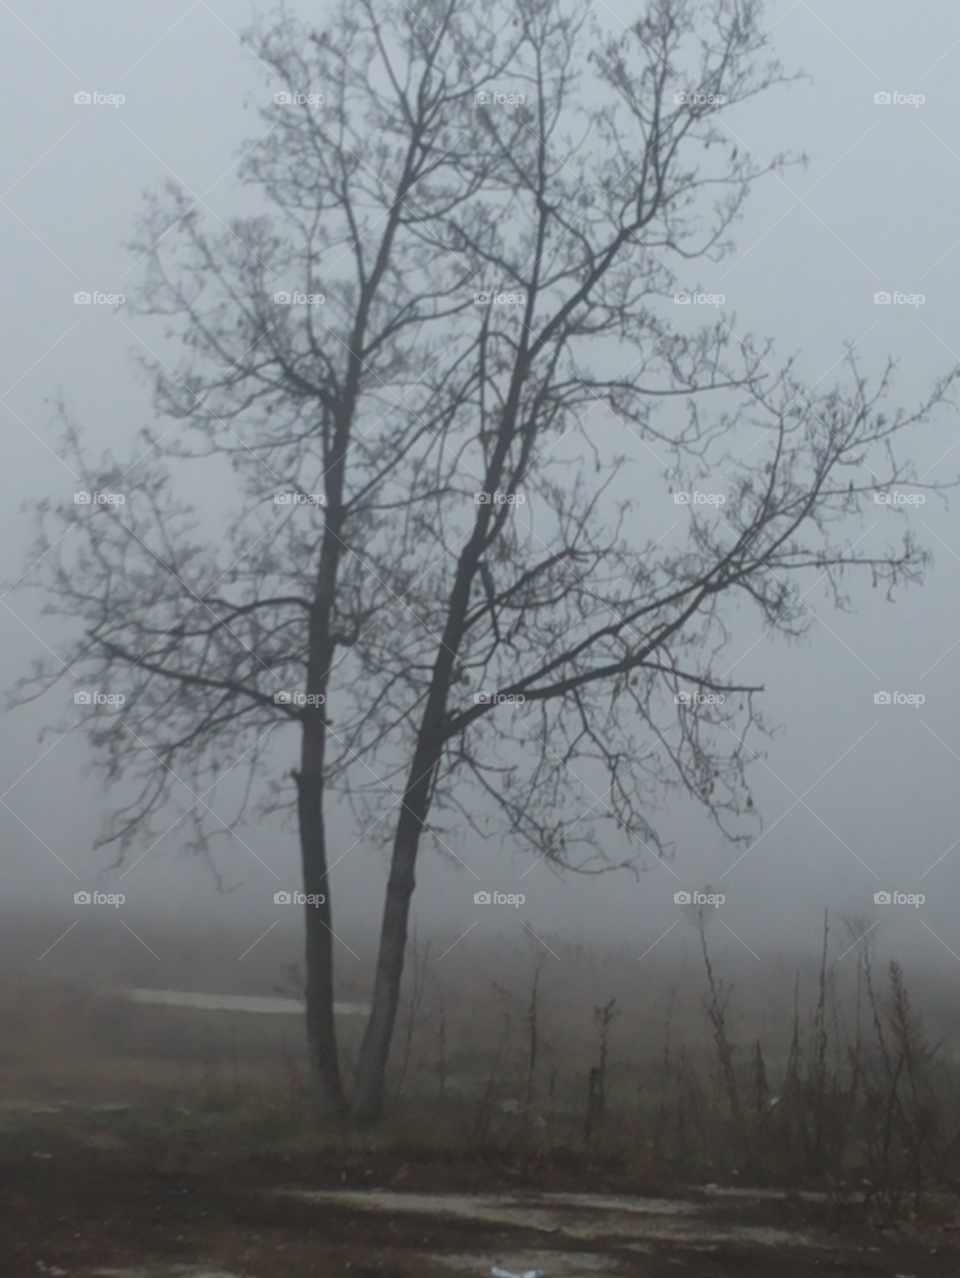 A lonely tree in the mist